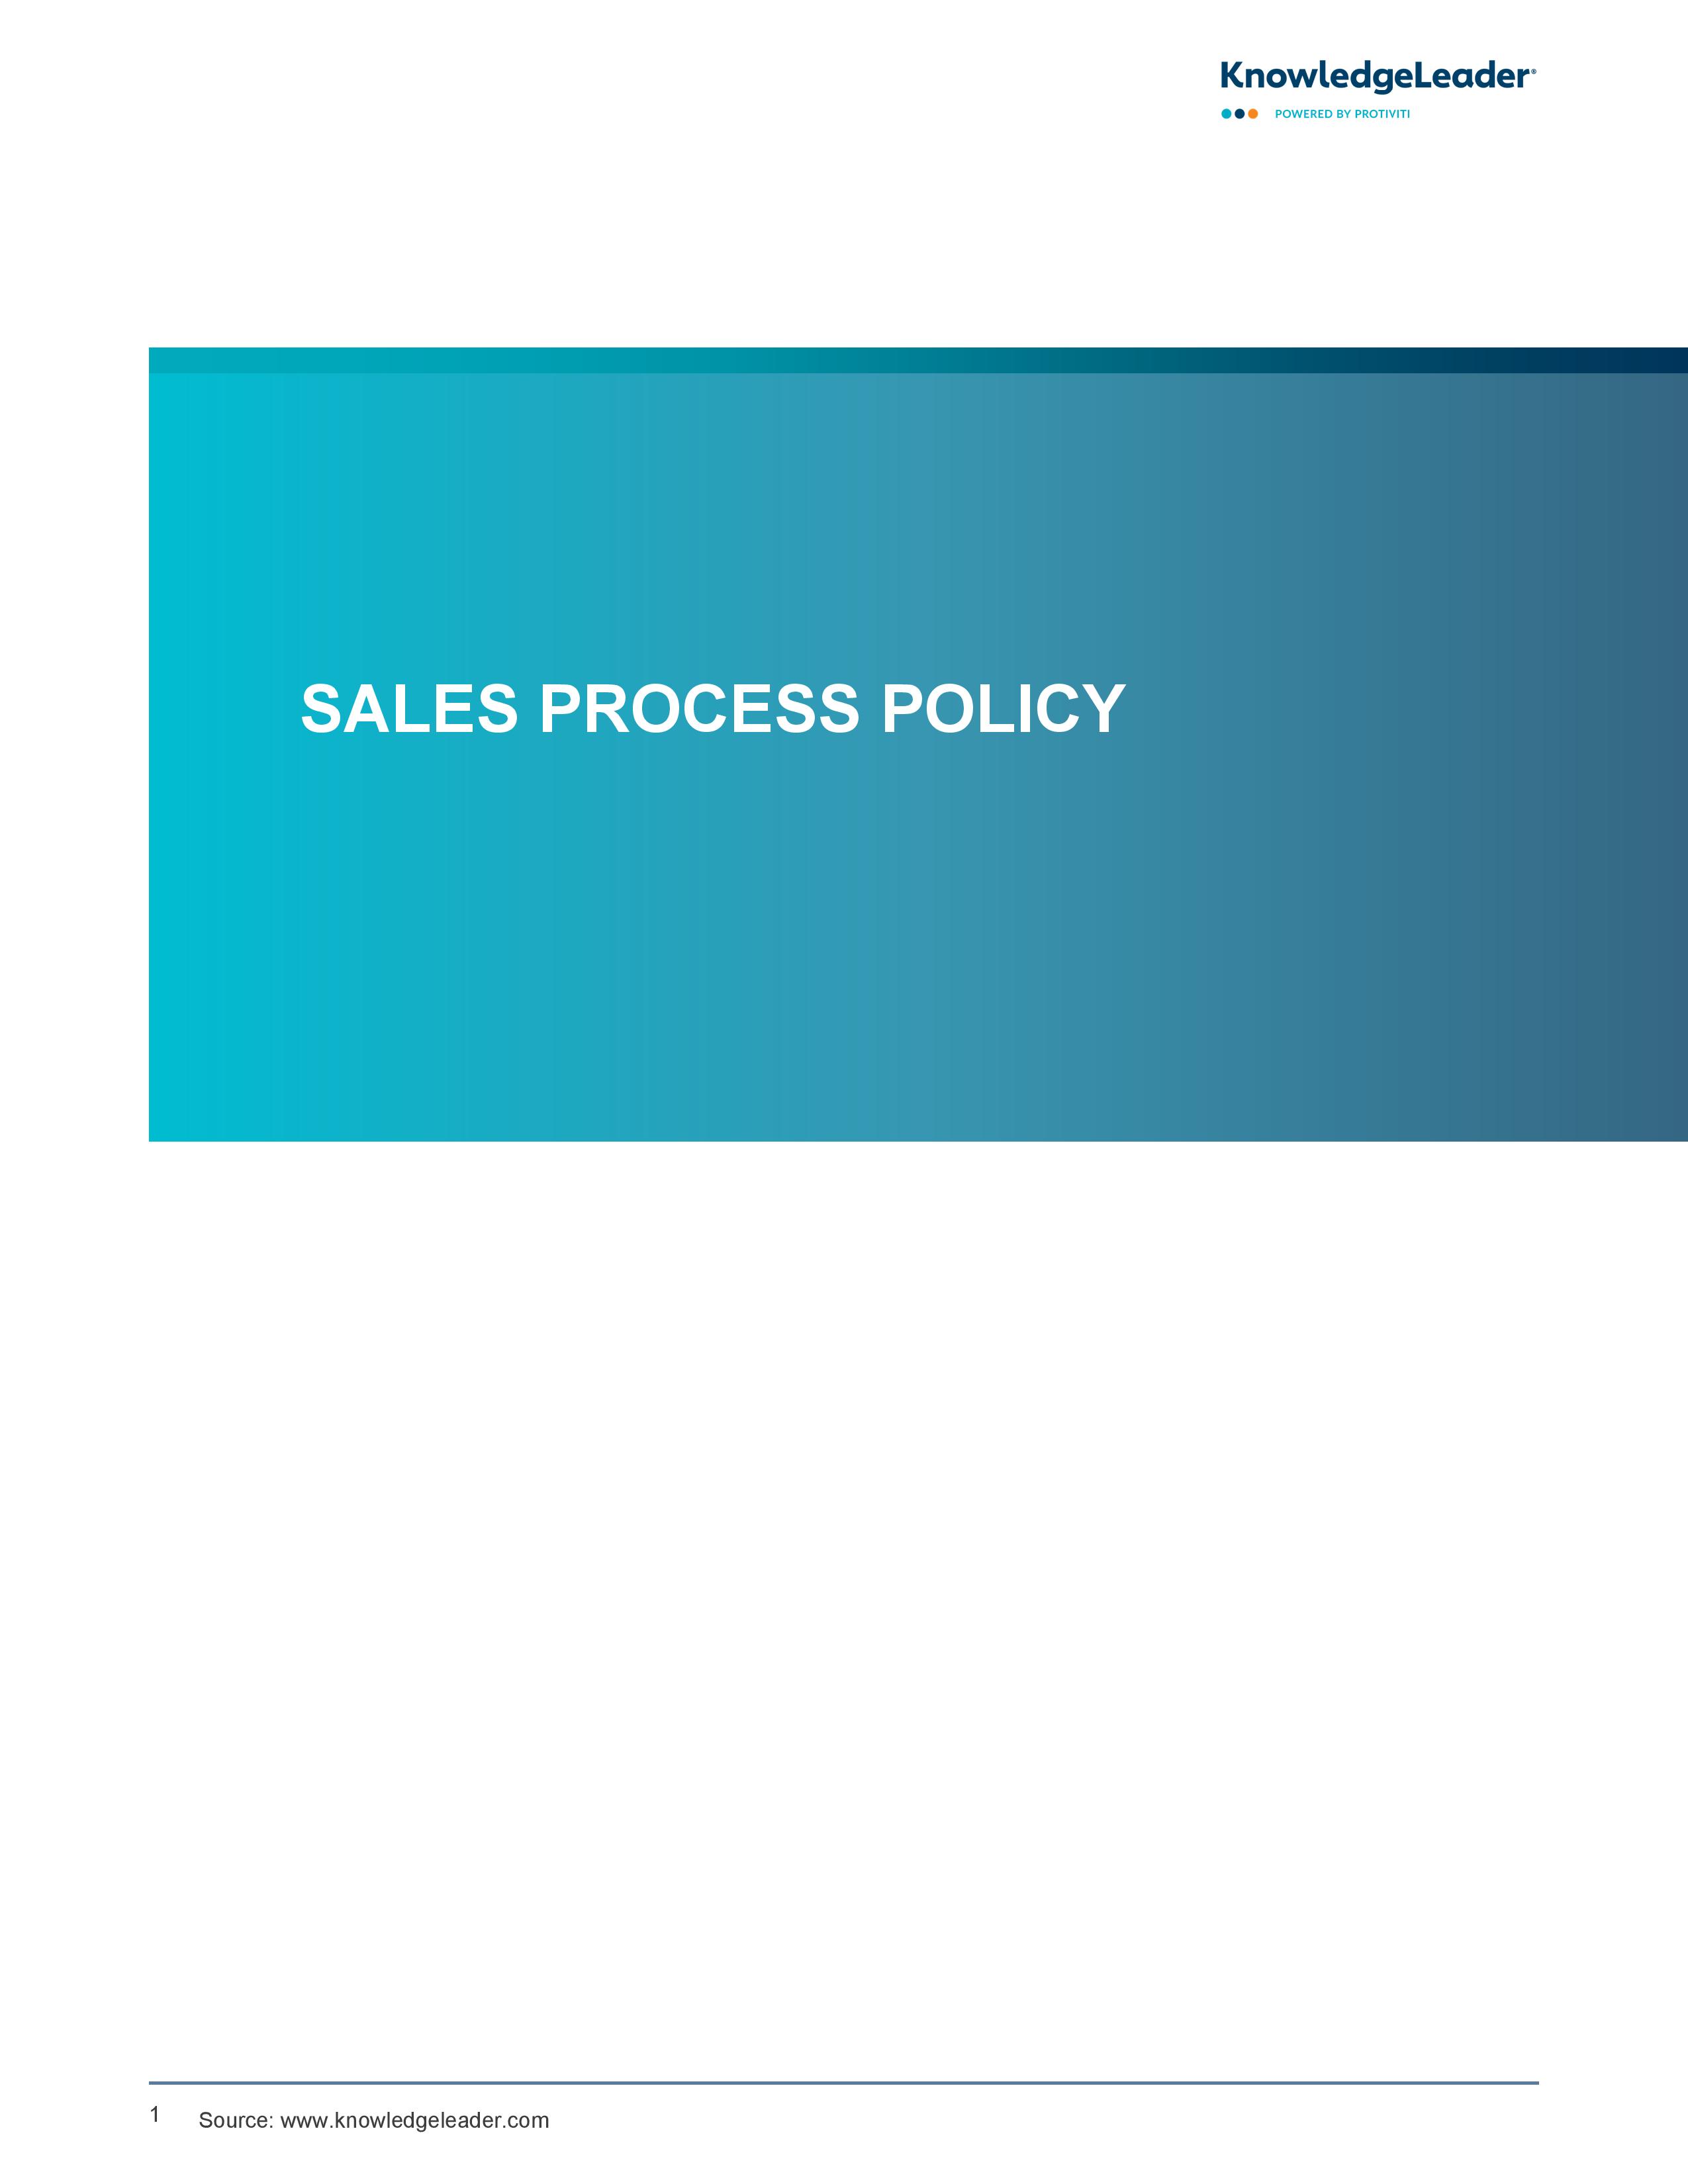 screenshot of the first page of Sales Process Policy